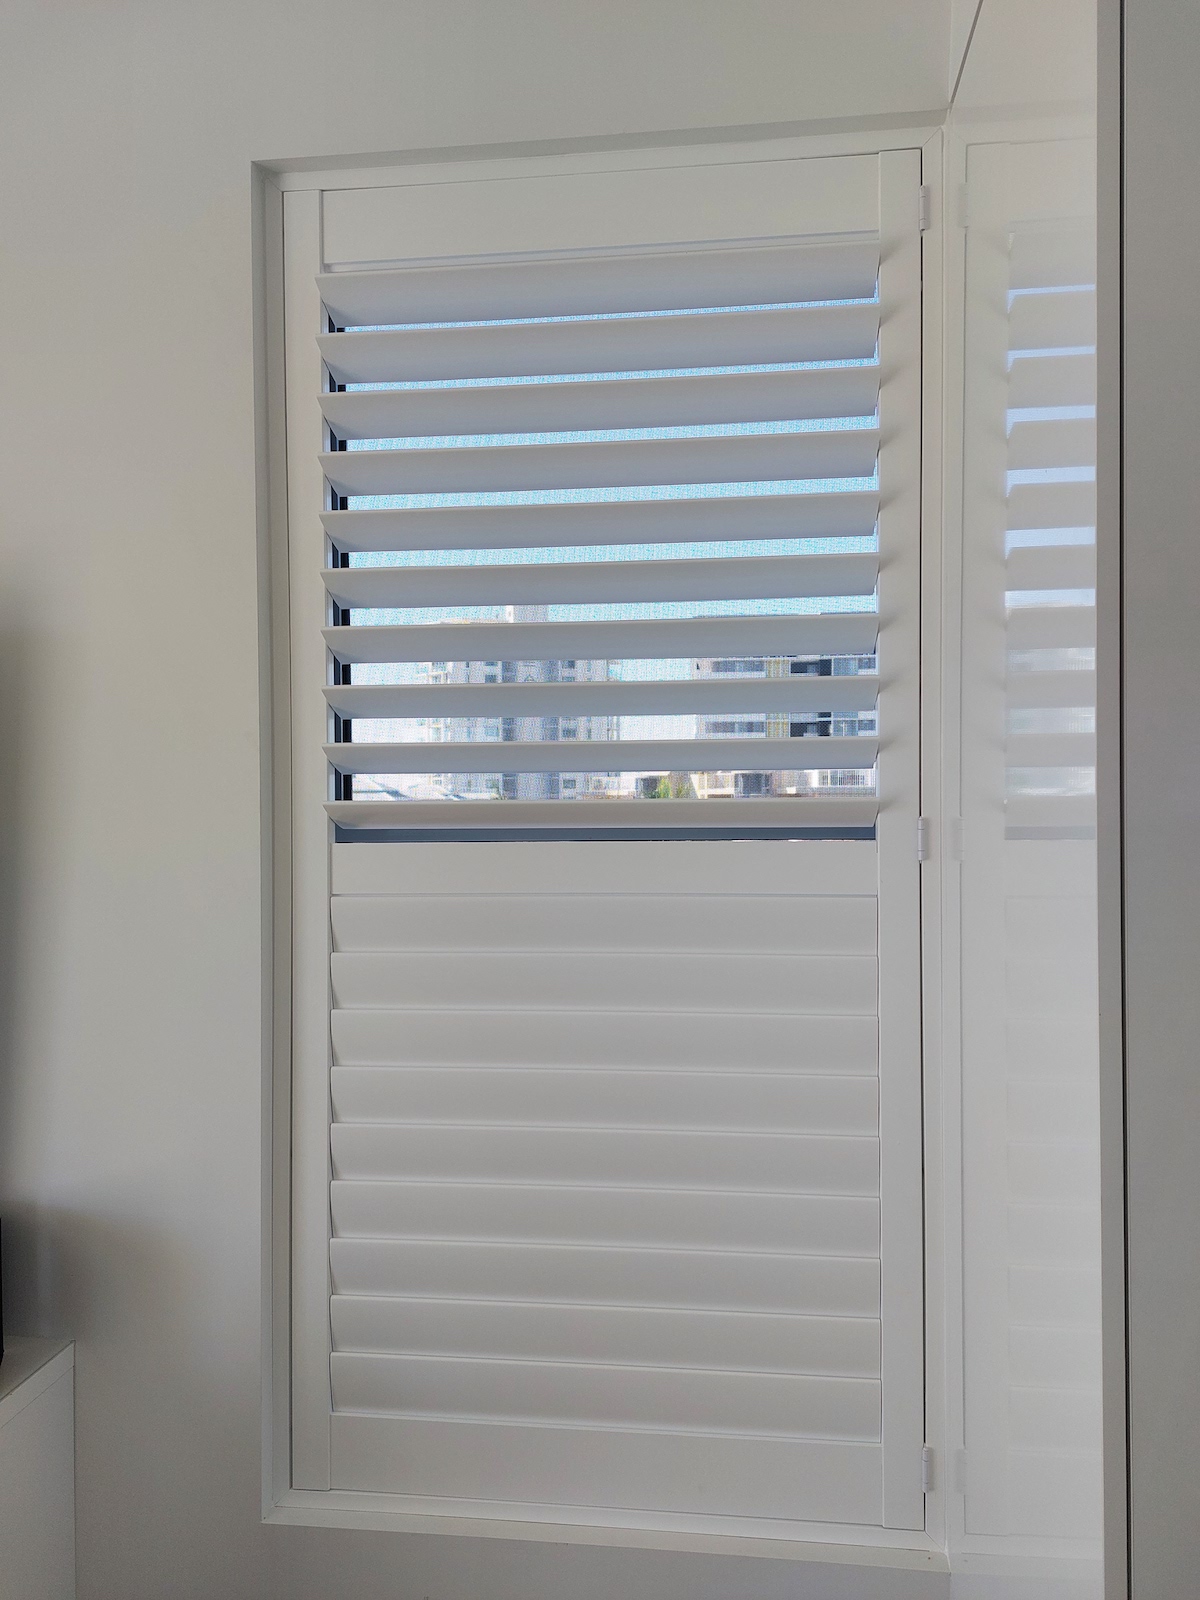 Custom Curtains and Blinds Sunshine Coast. We also have shutters, sheers, Roman blinds, roller blinds, modern styles and materials,window furnishings and drapes Noosa, Twin Waters, Maroochydore